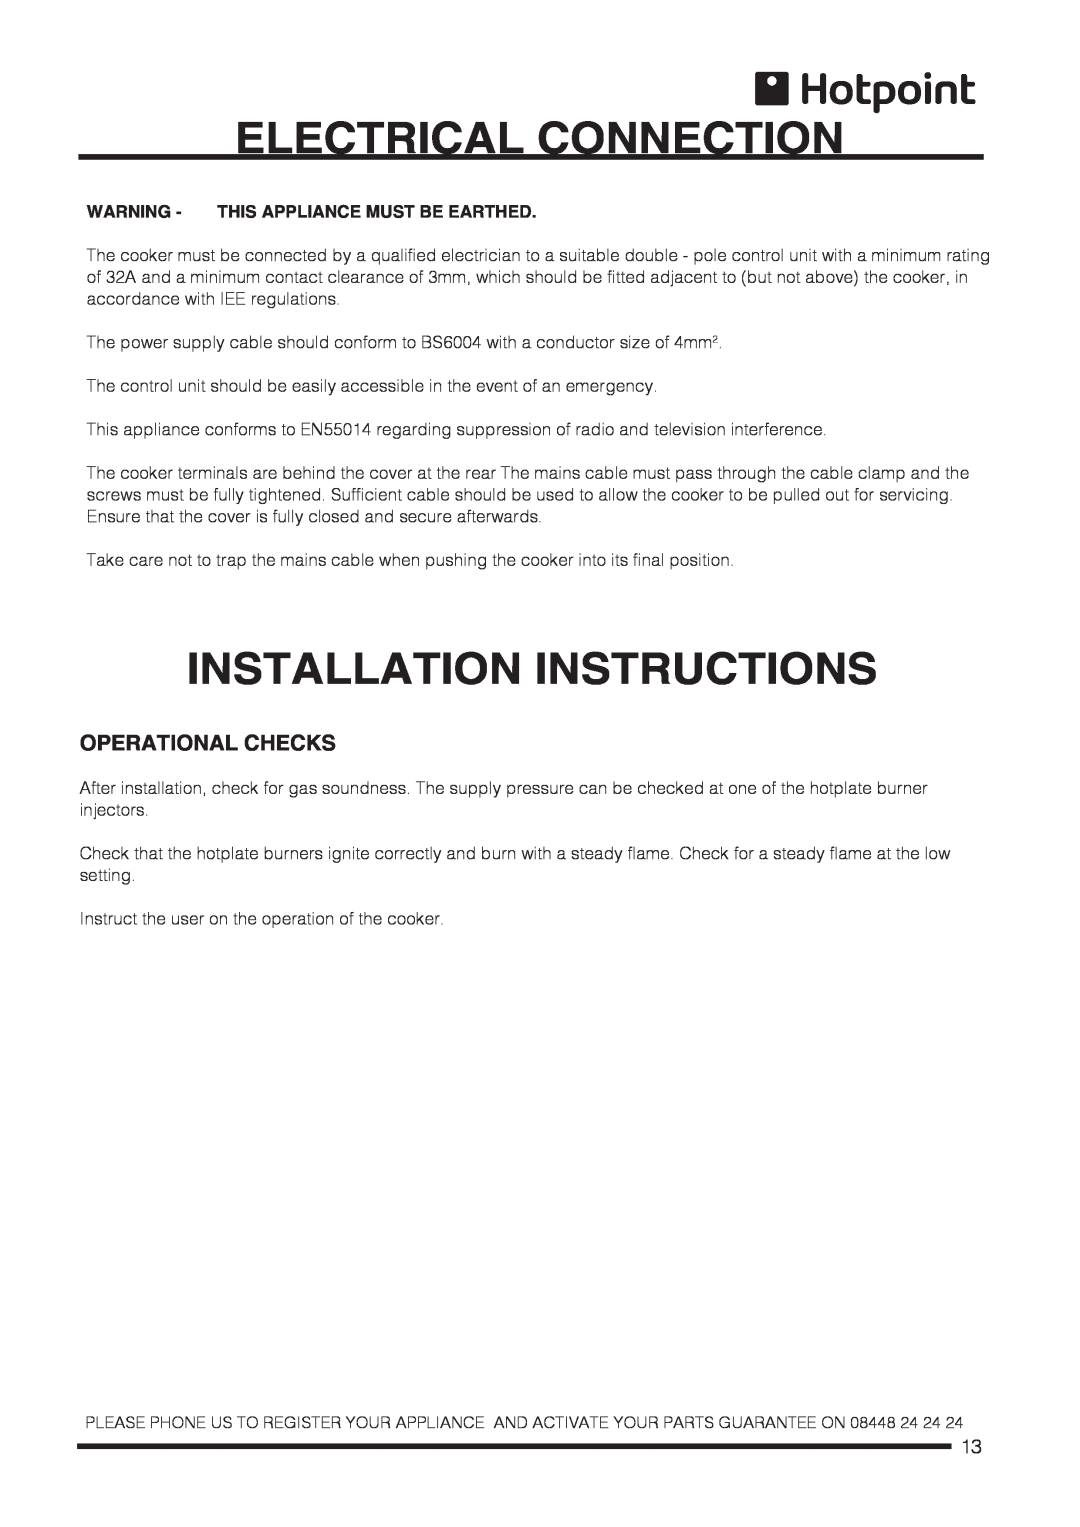 Hotpoint CH60DTCF S, CH60DPCF S, CH60DPXF S, CH60DTXFS Electrical Connection, Installation Instructions, Operational Checks 